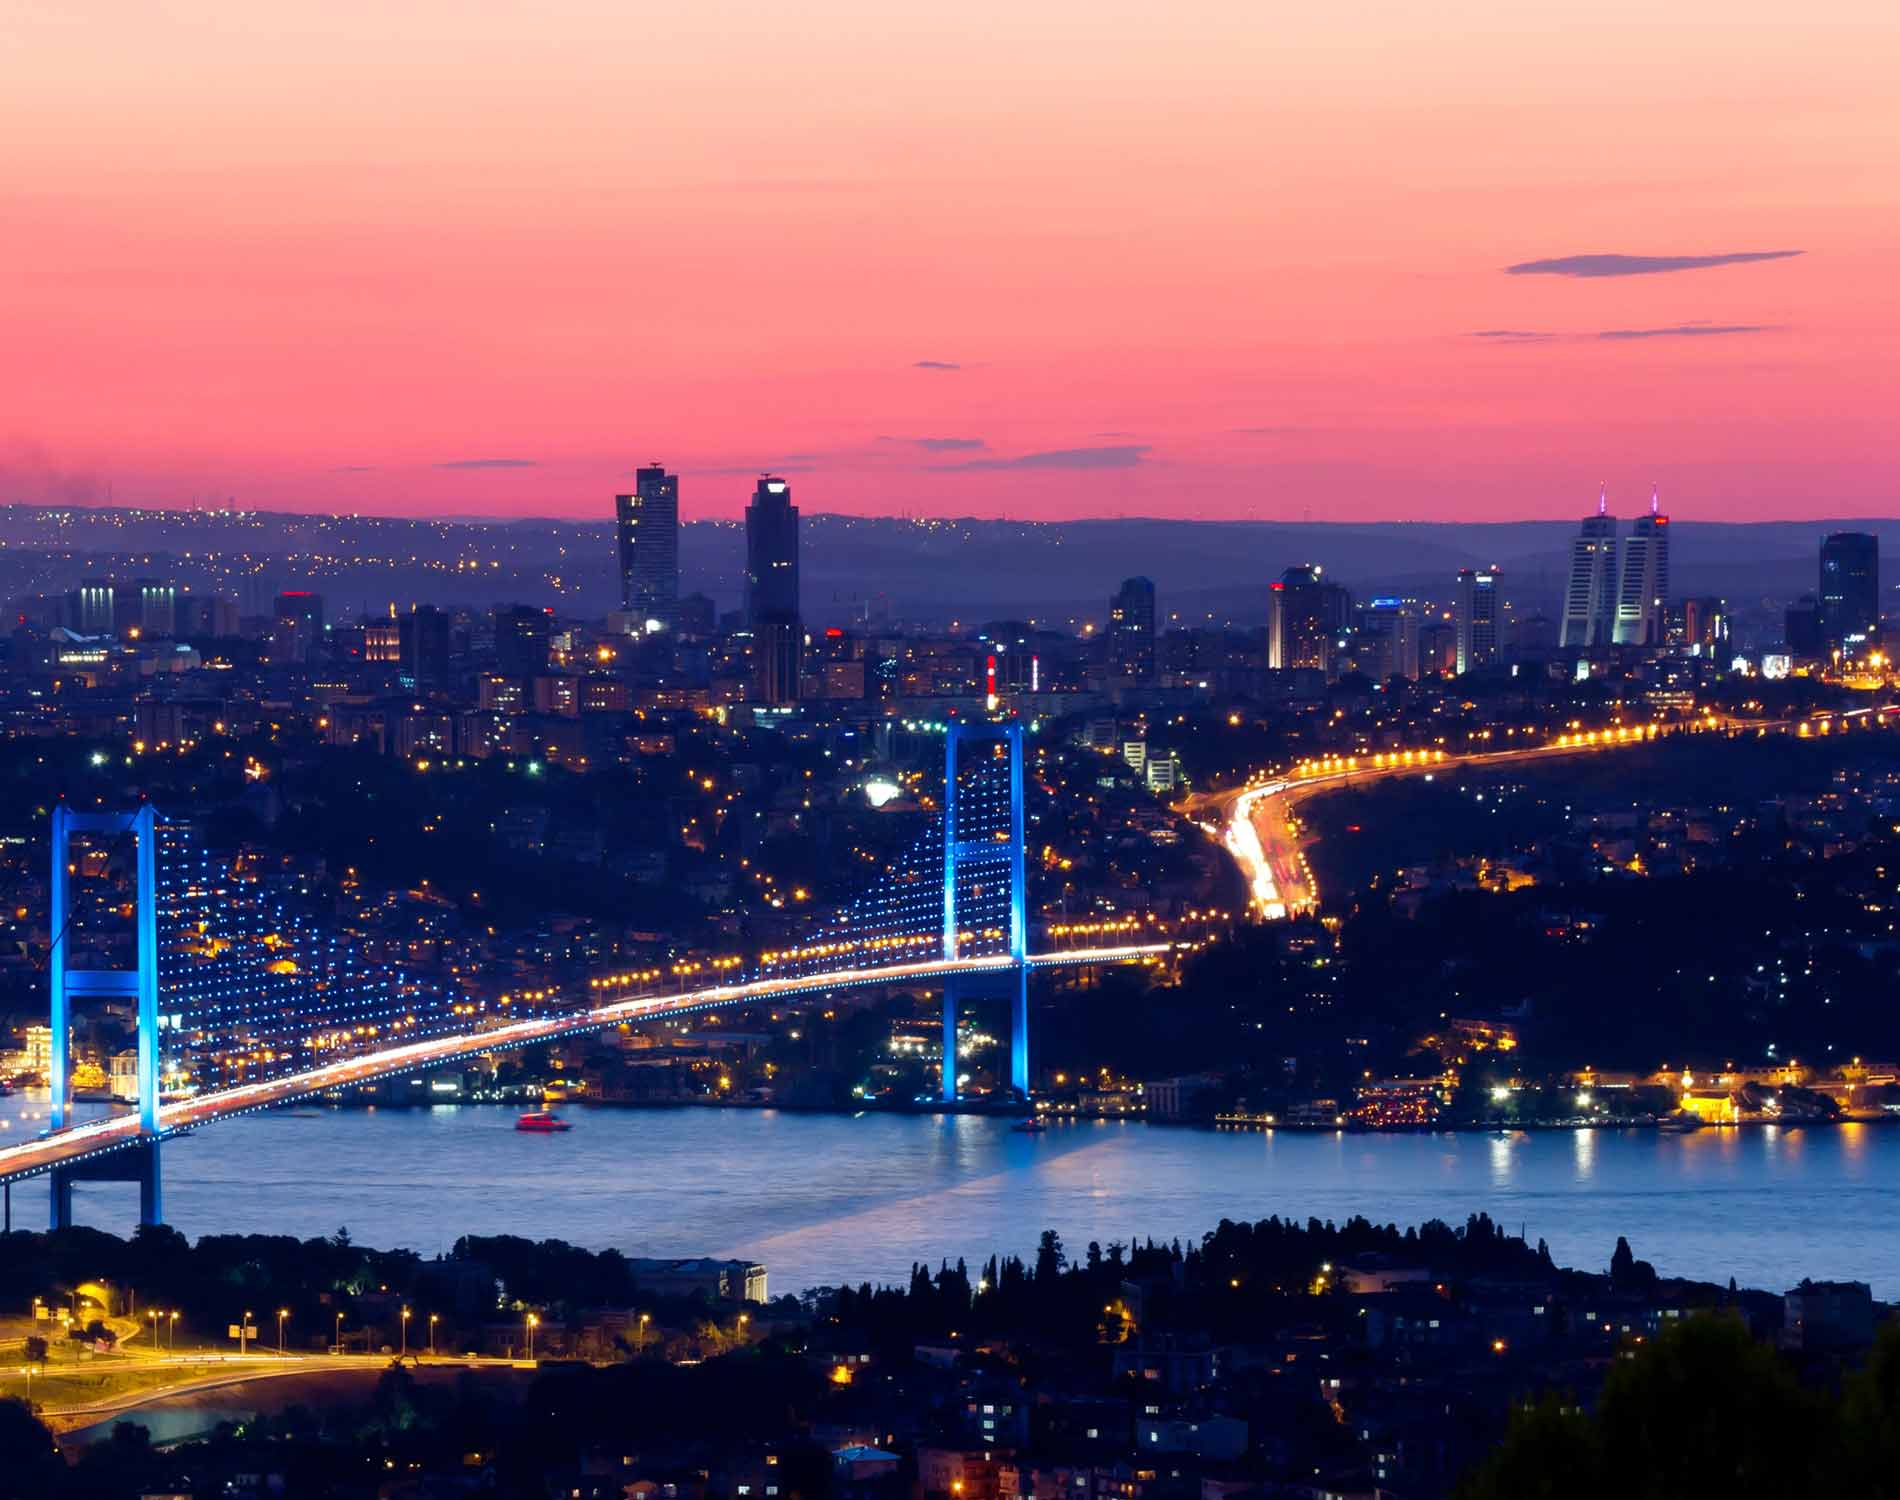 /-/media/images/website/background-images/offices/istanbul/istanbul-1.ashx